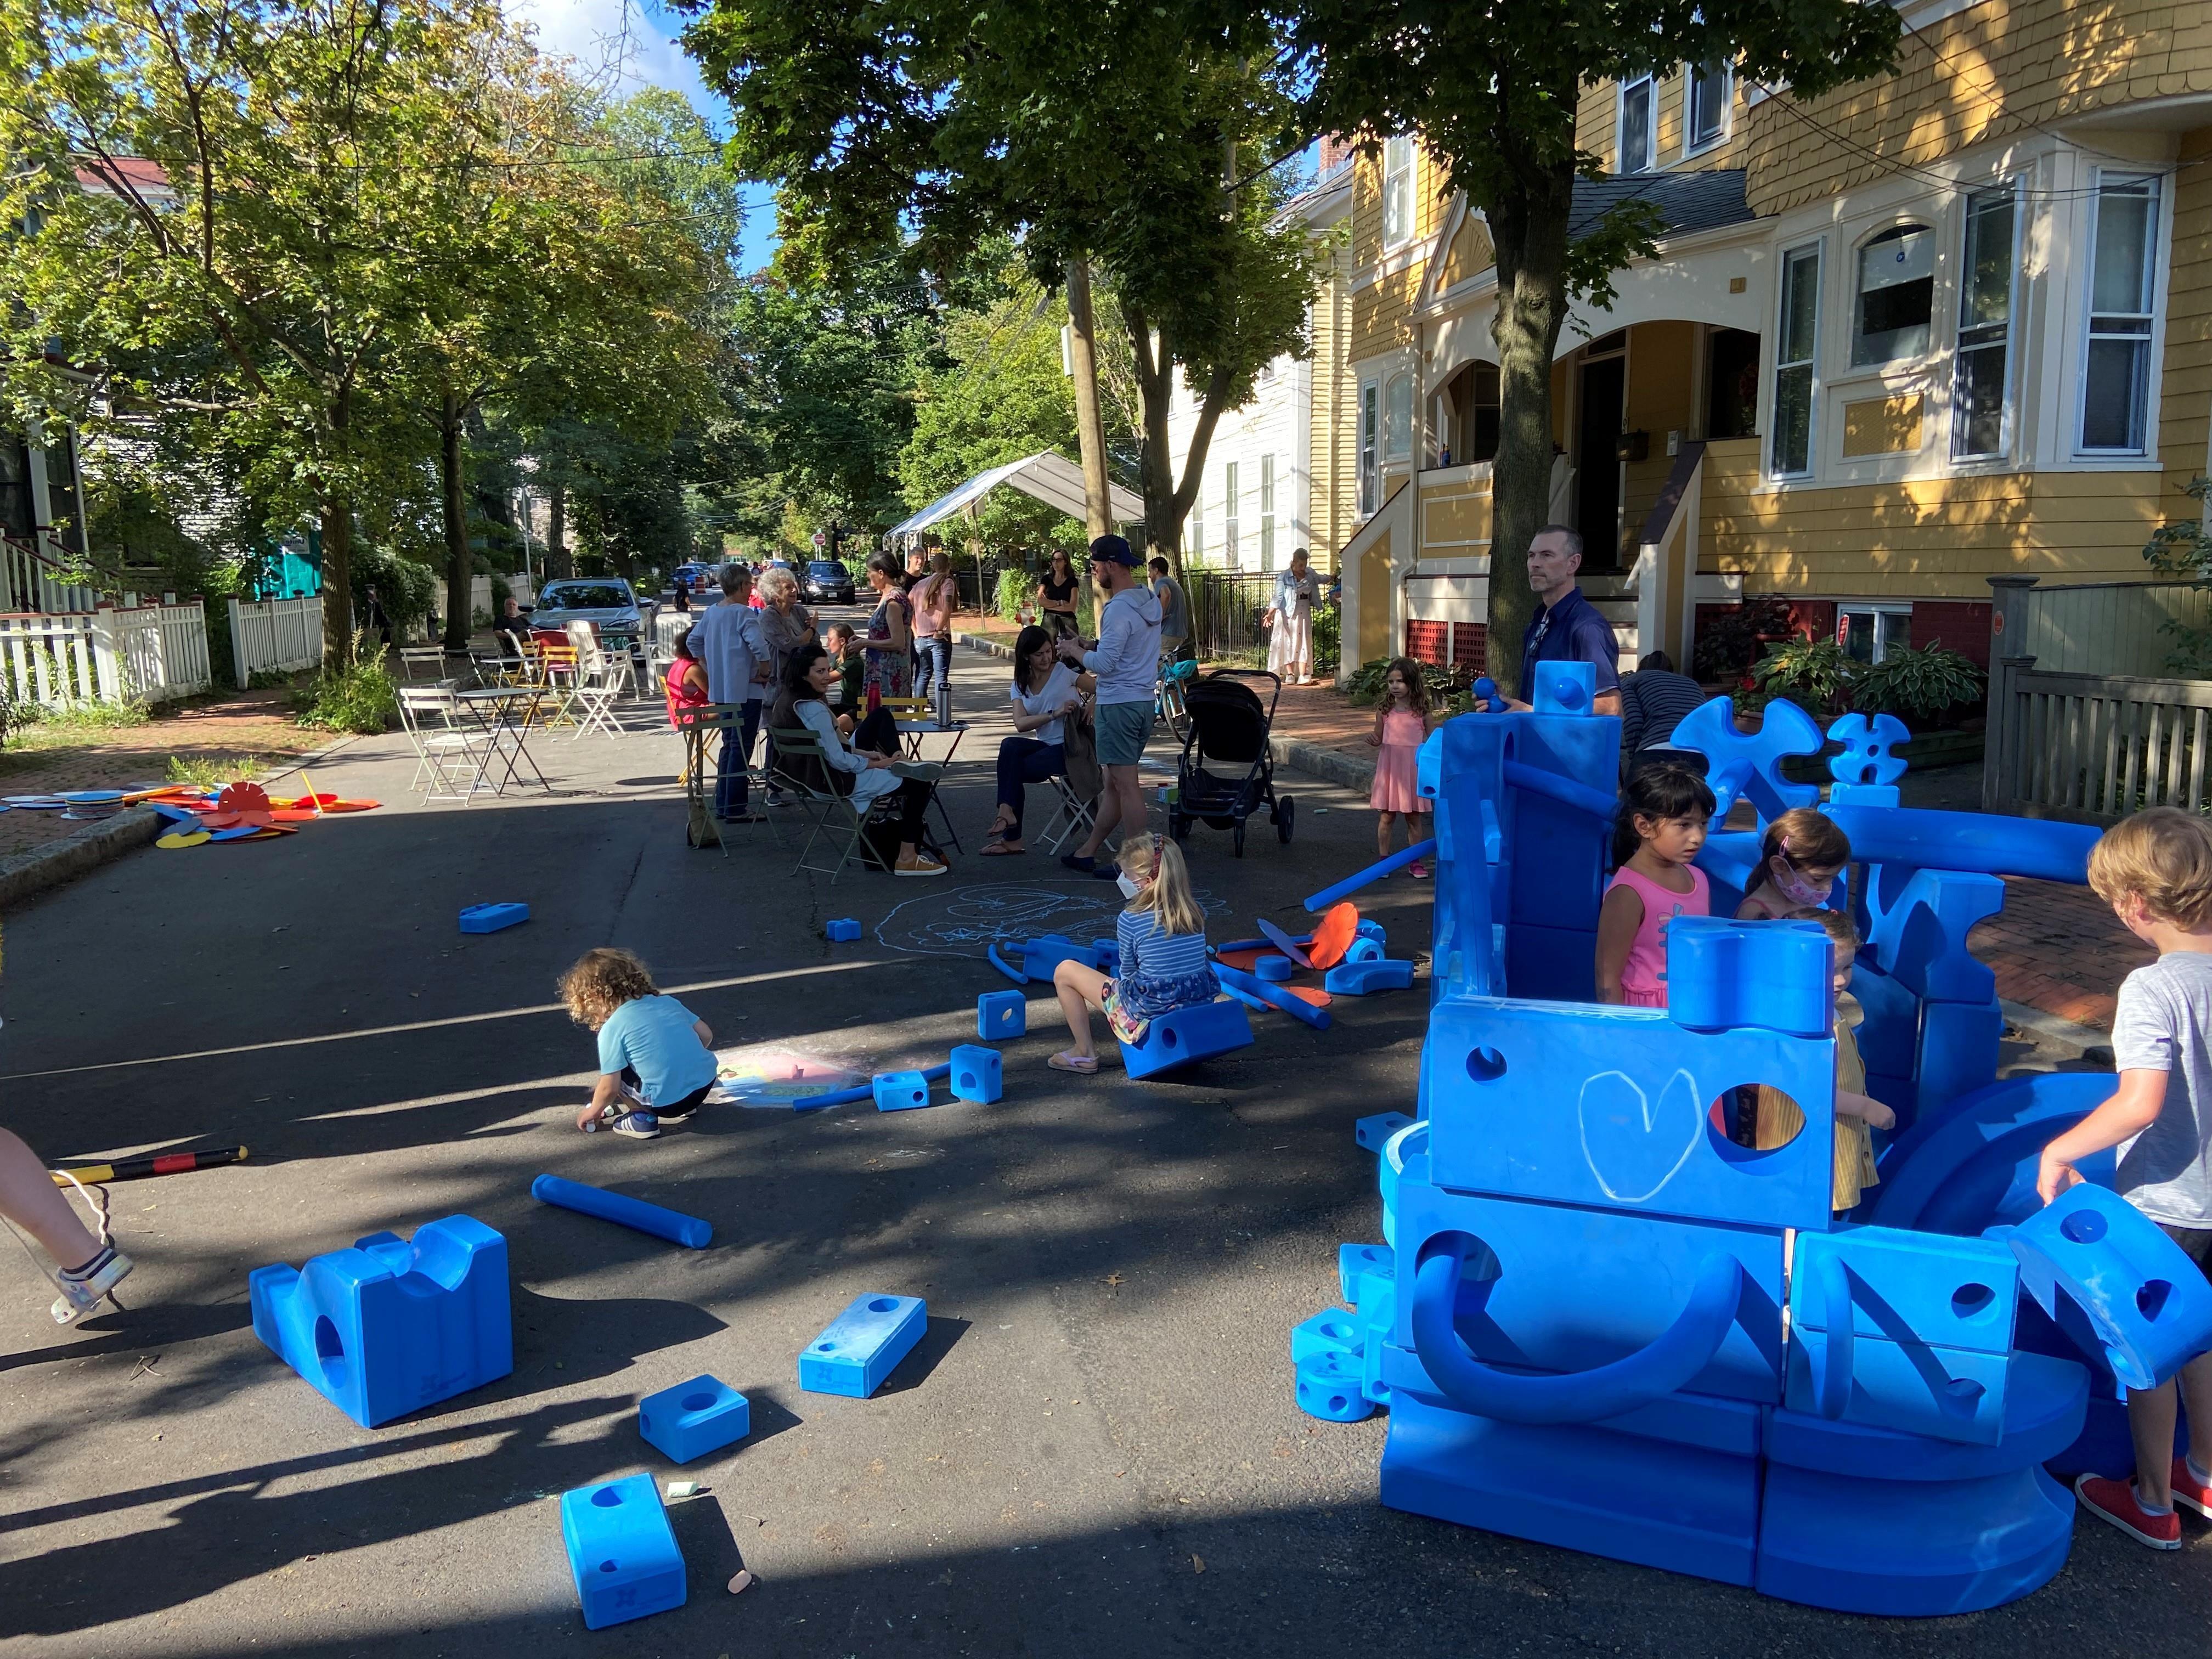 children playing with blue blocks on a sunny residential street